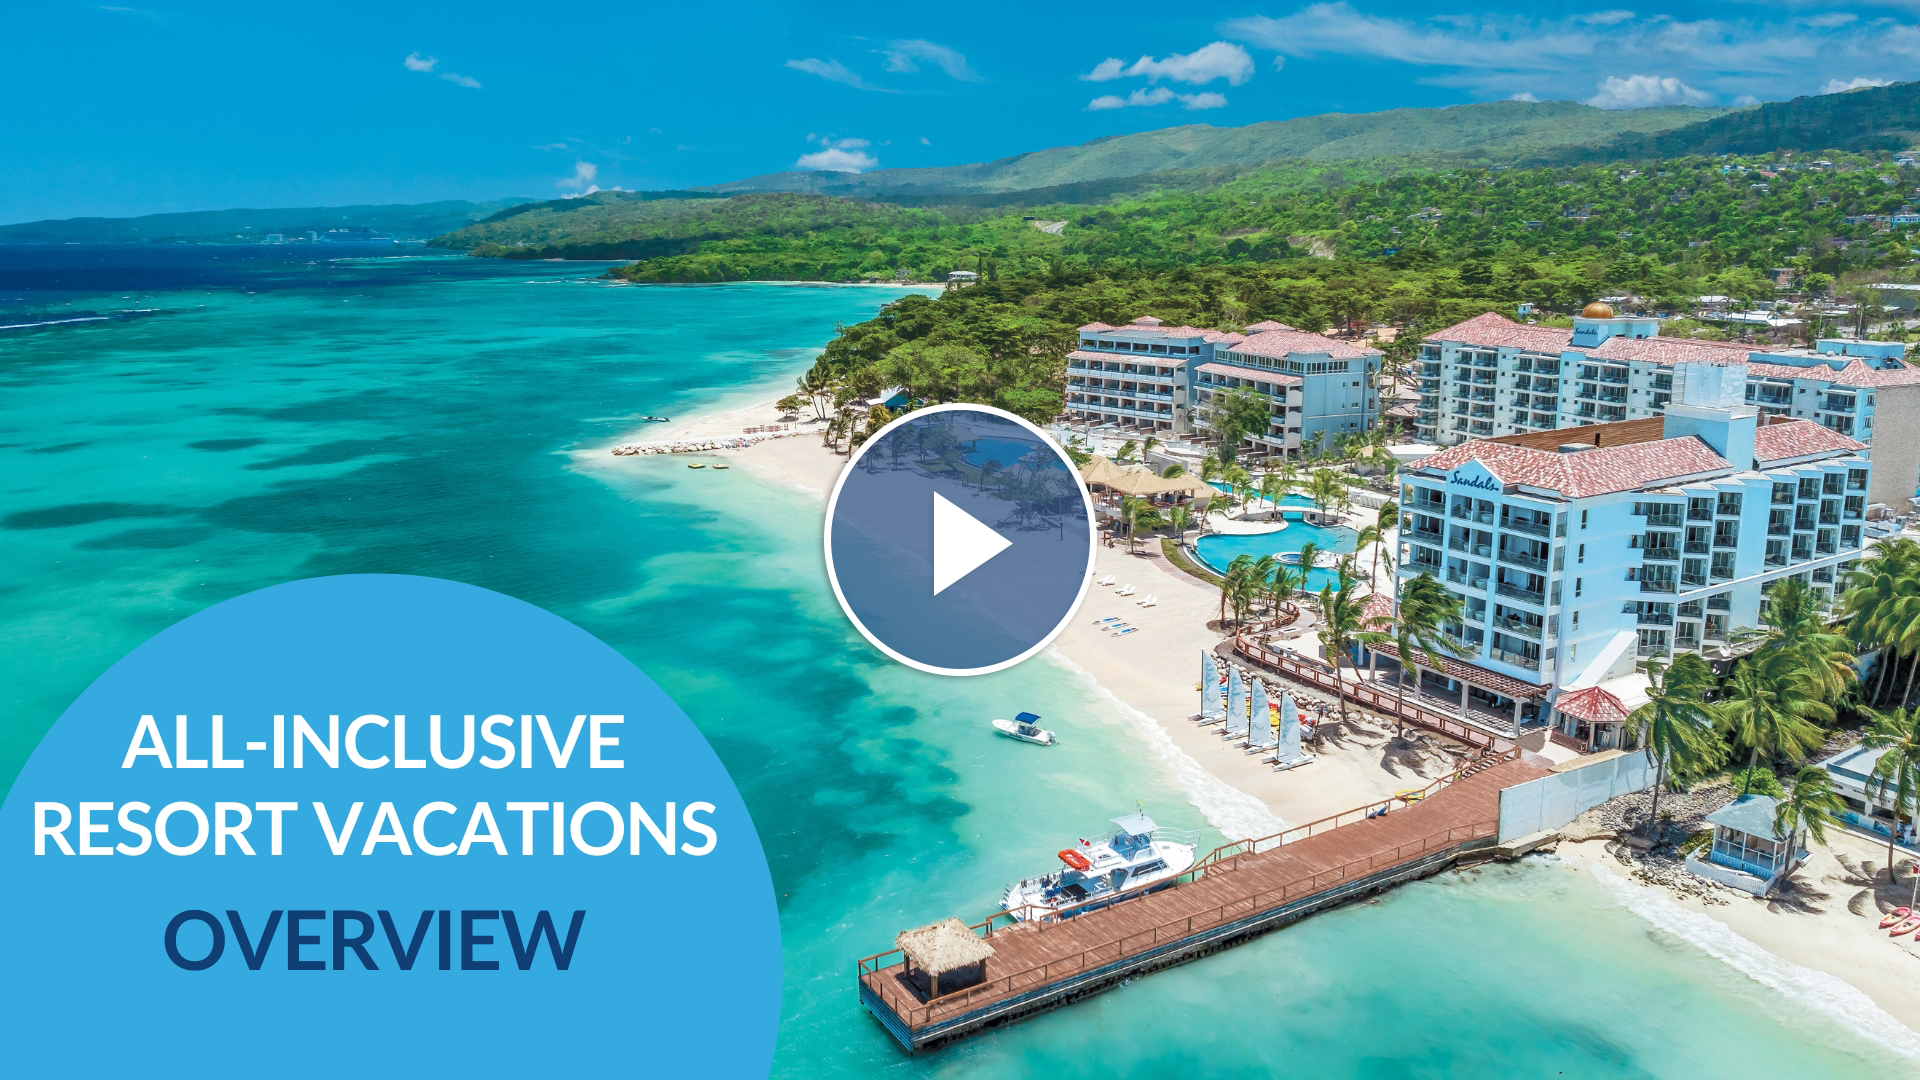 All-Inclusive Resorts Overview